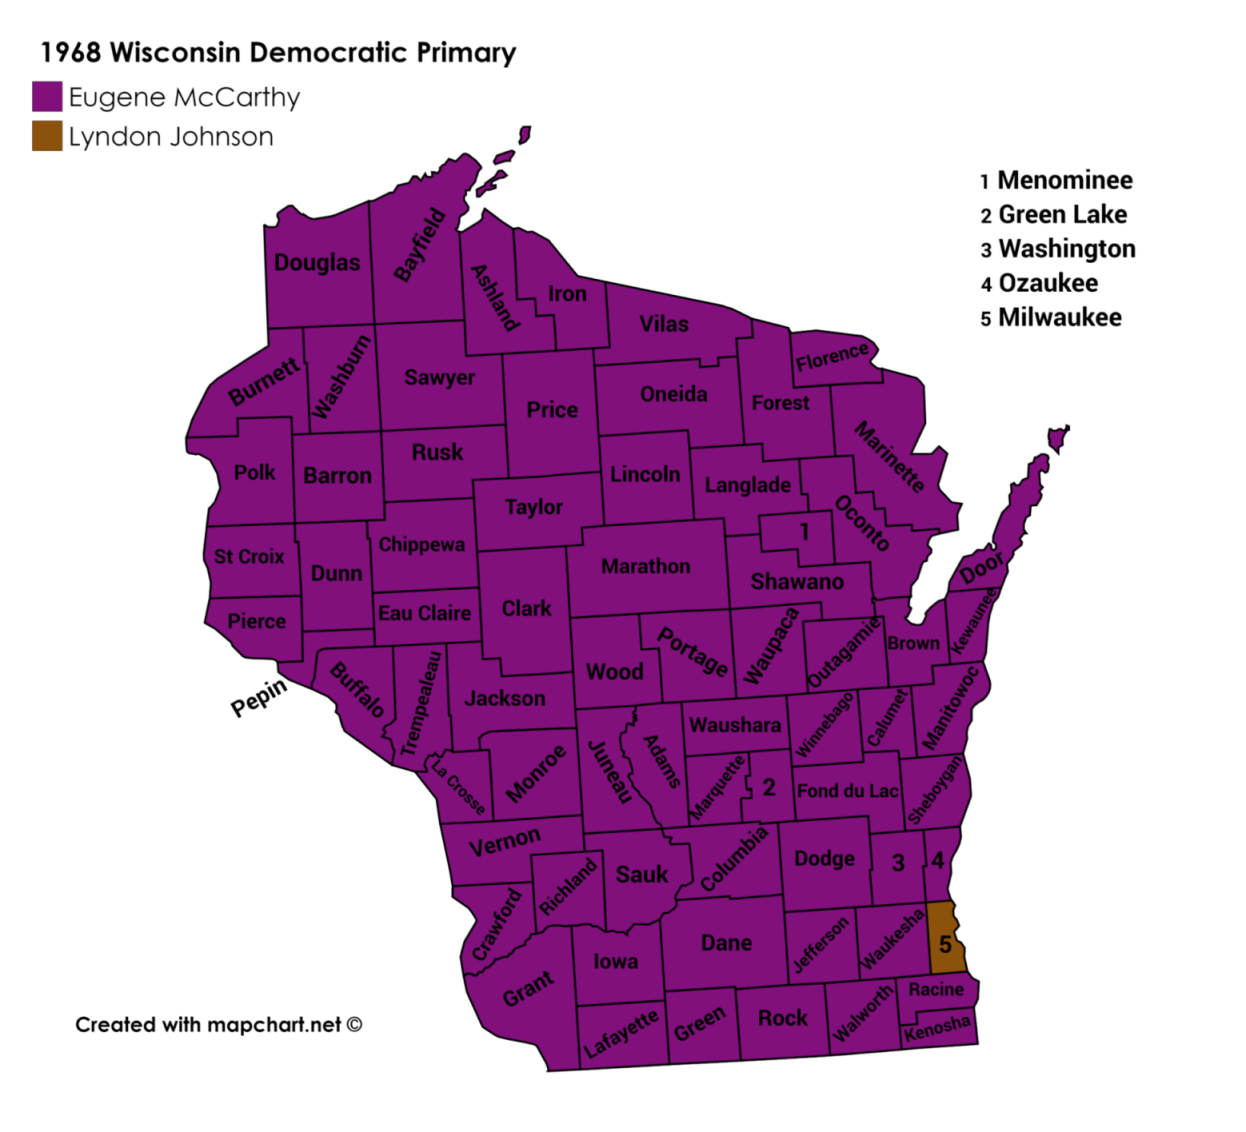 1968 Wisconsin Democratic Primary cropped.png